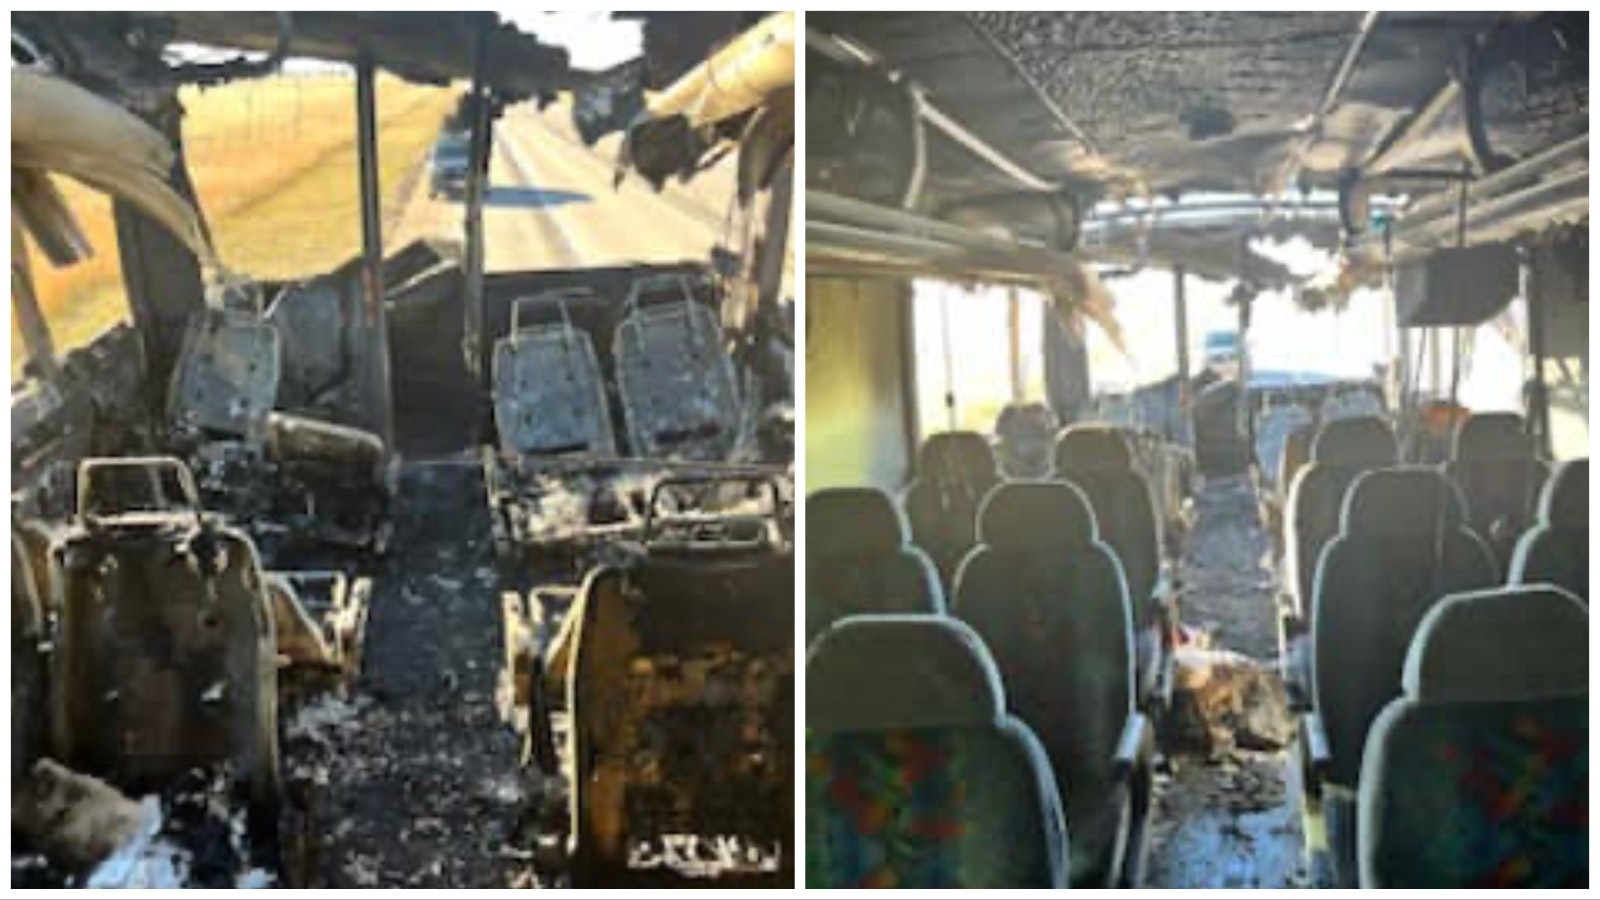 Inside the South Dakota School of Mines bus that burned on Highway 85 south of Lusk on Saturday night.